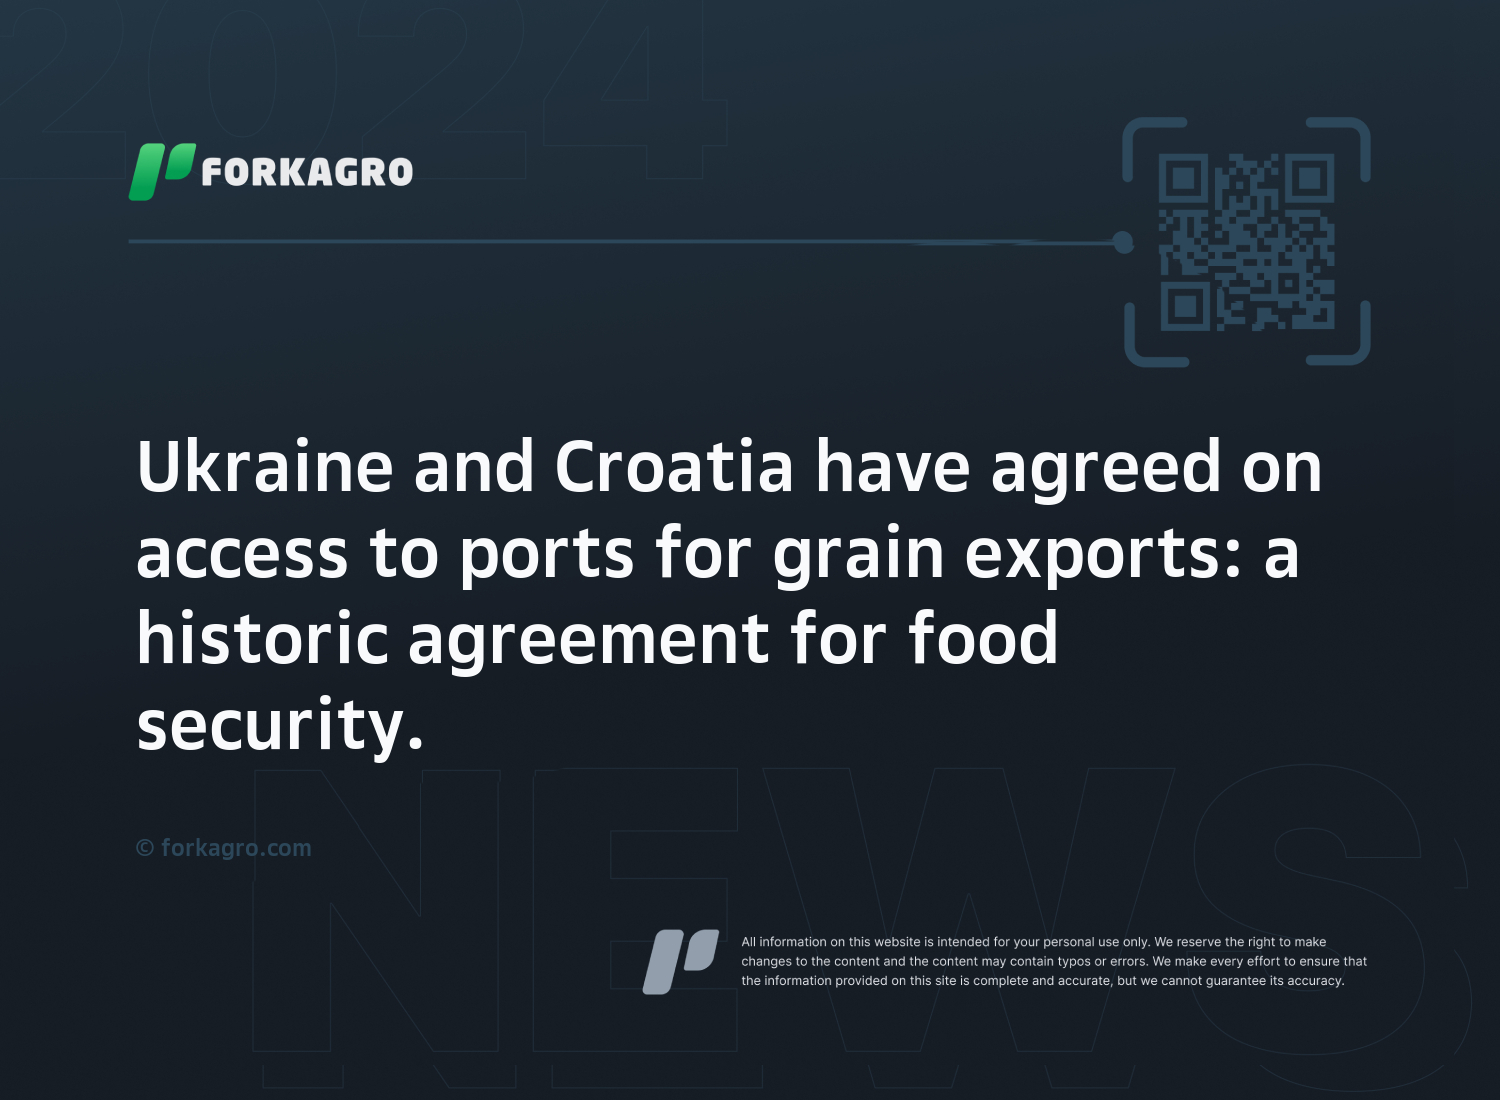 Ukraine and Croatia have agreed on access to ports for grain exports: a historic agreement for food security.